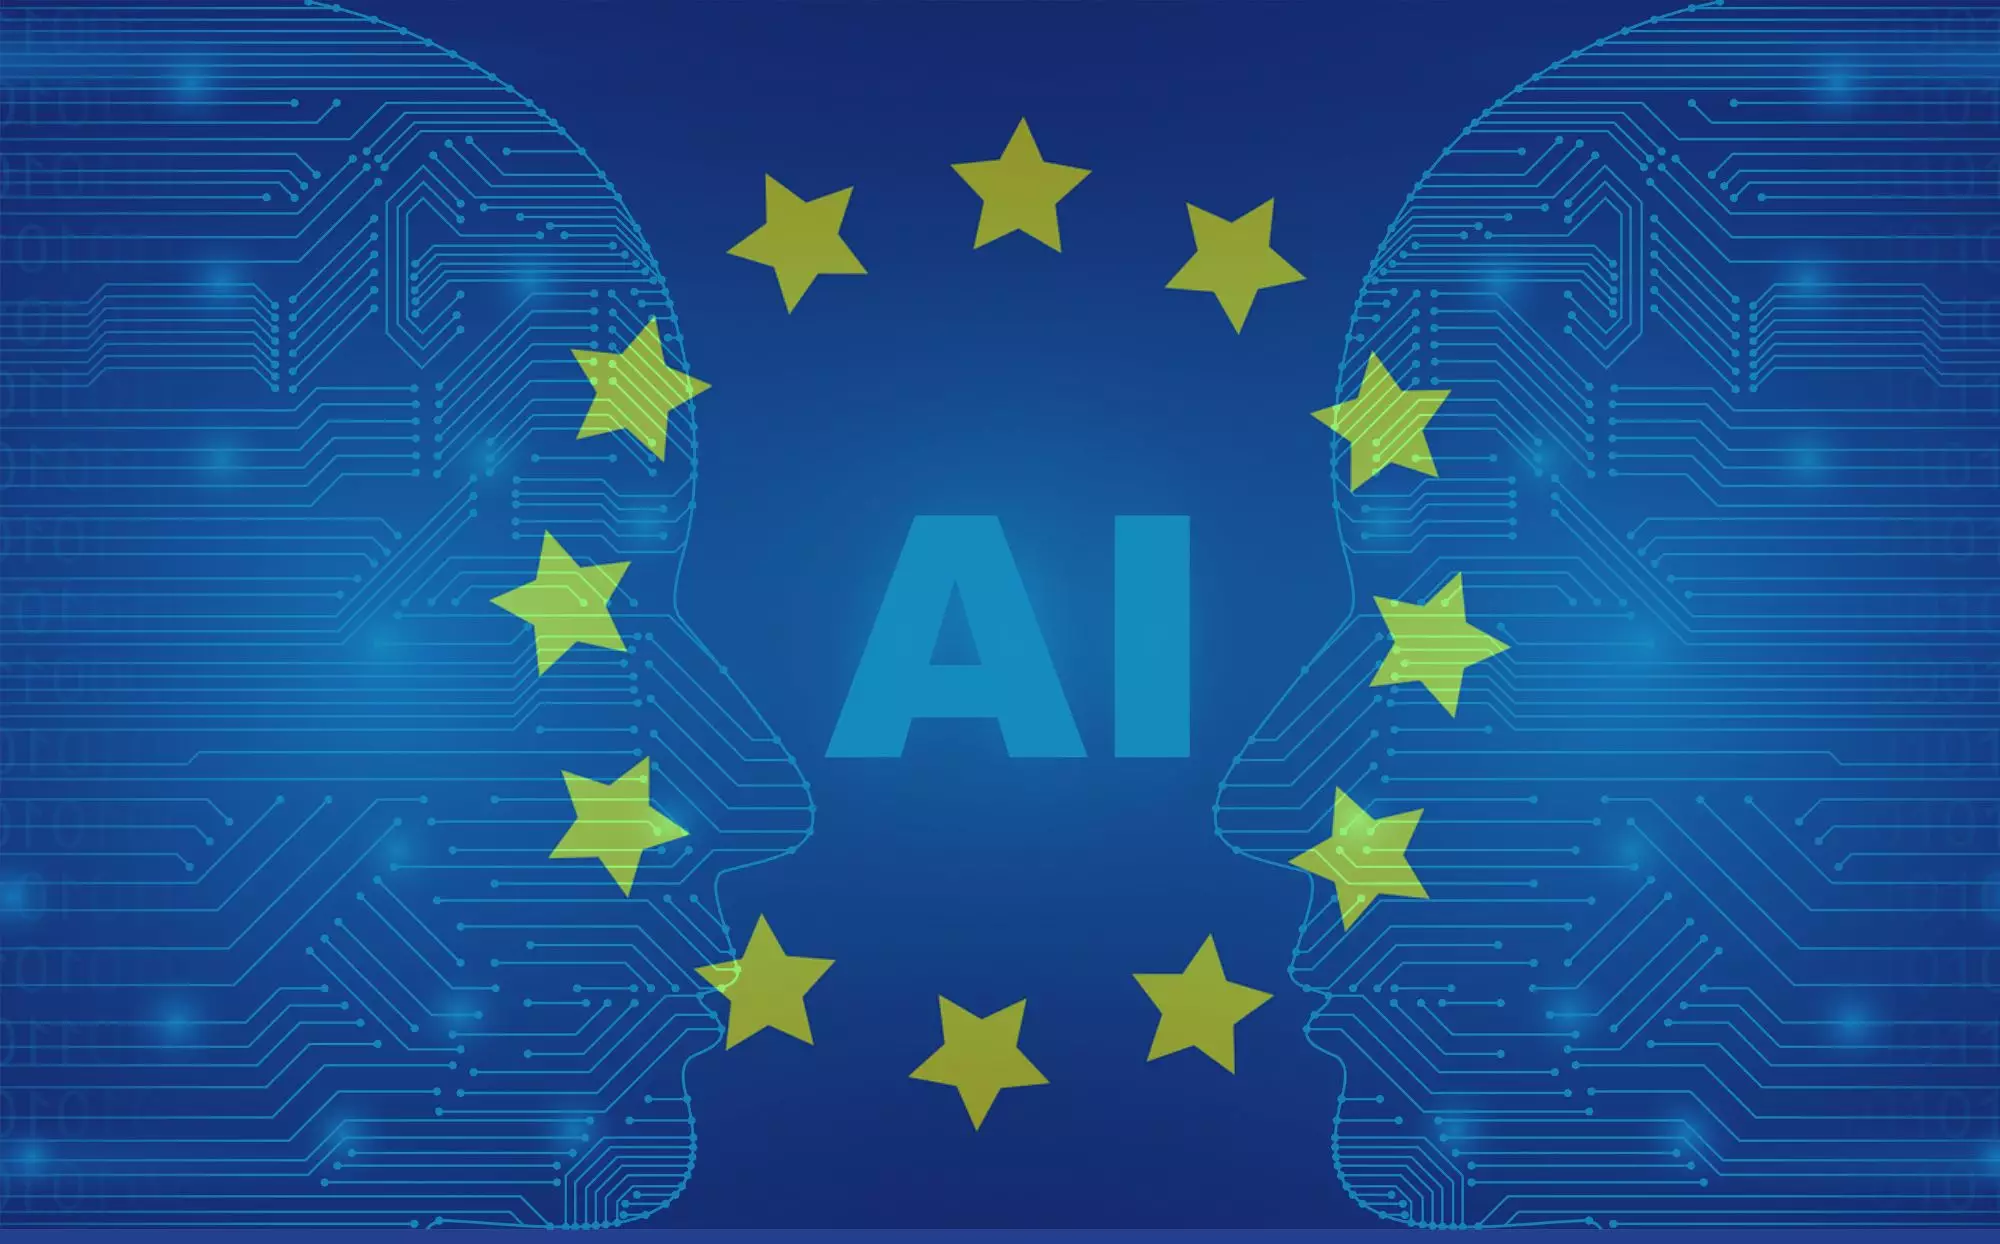 What to expect from the EU AI Regulation?